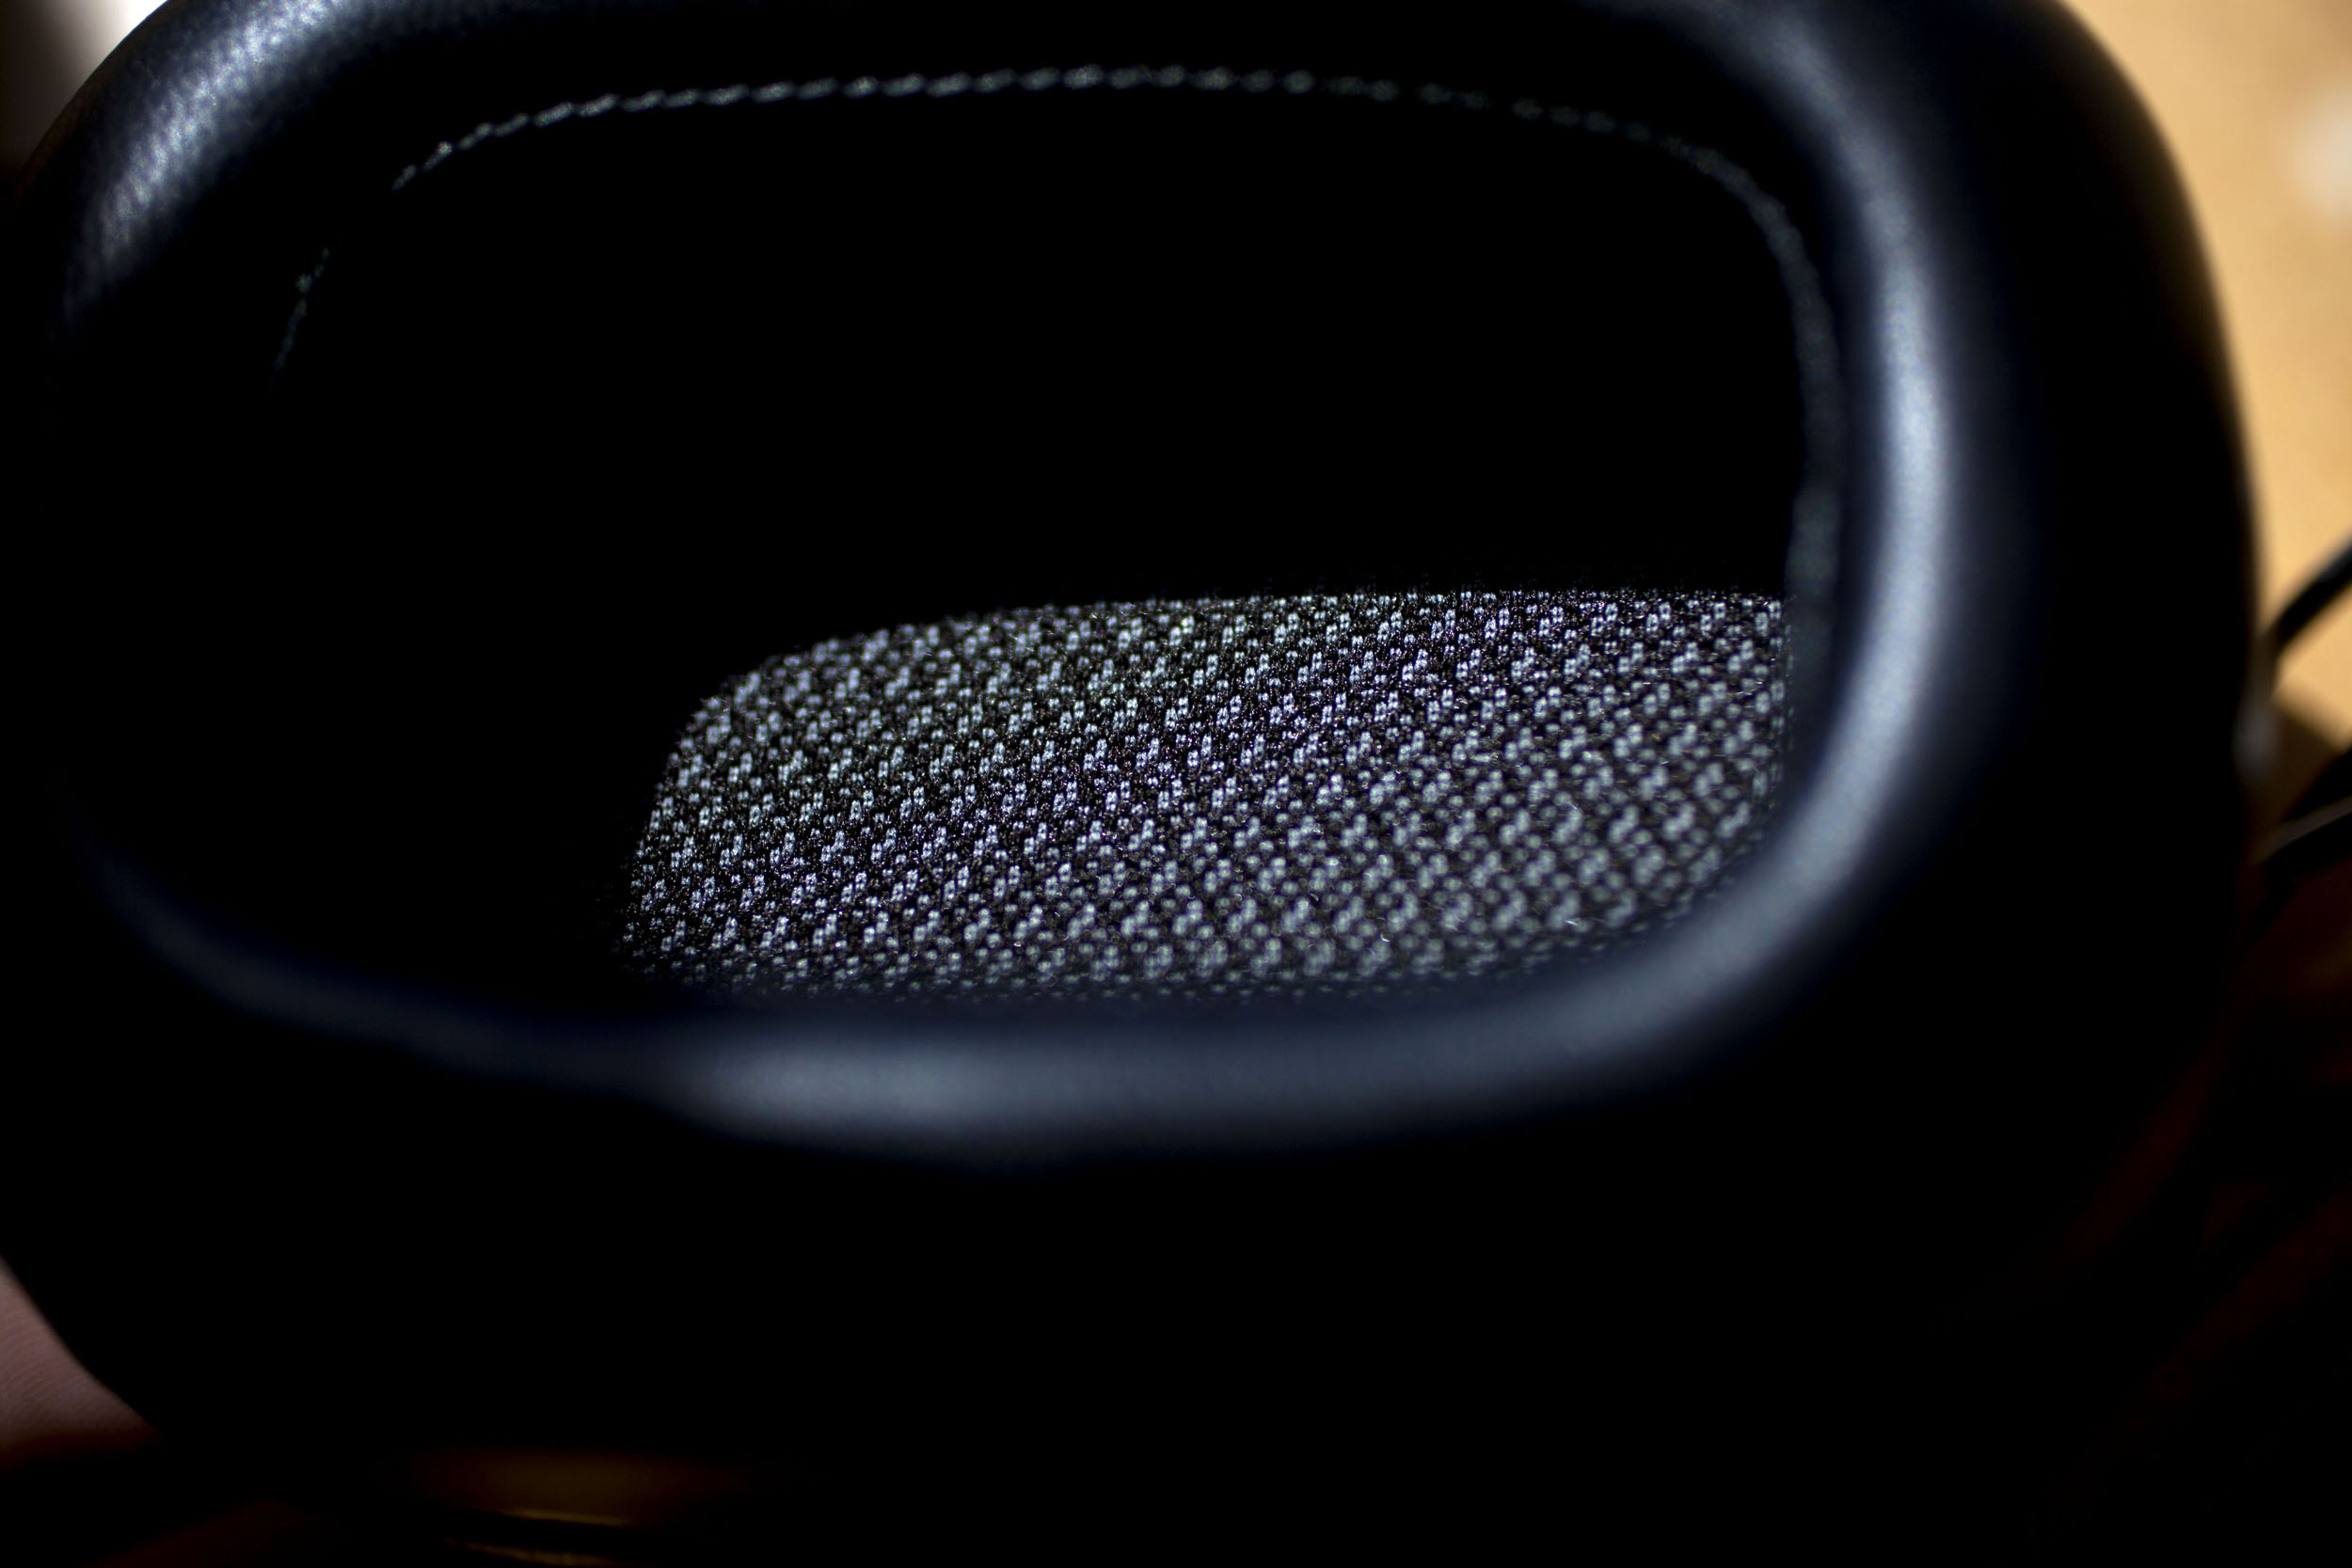 Review: Bowers & Wilkins P7 Headphones | WIRED